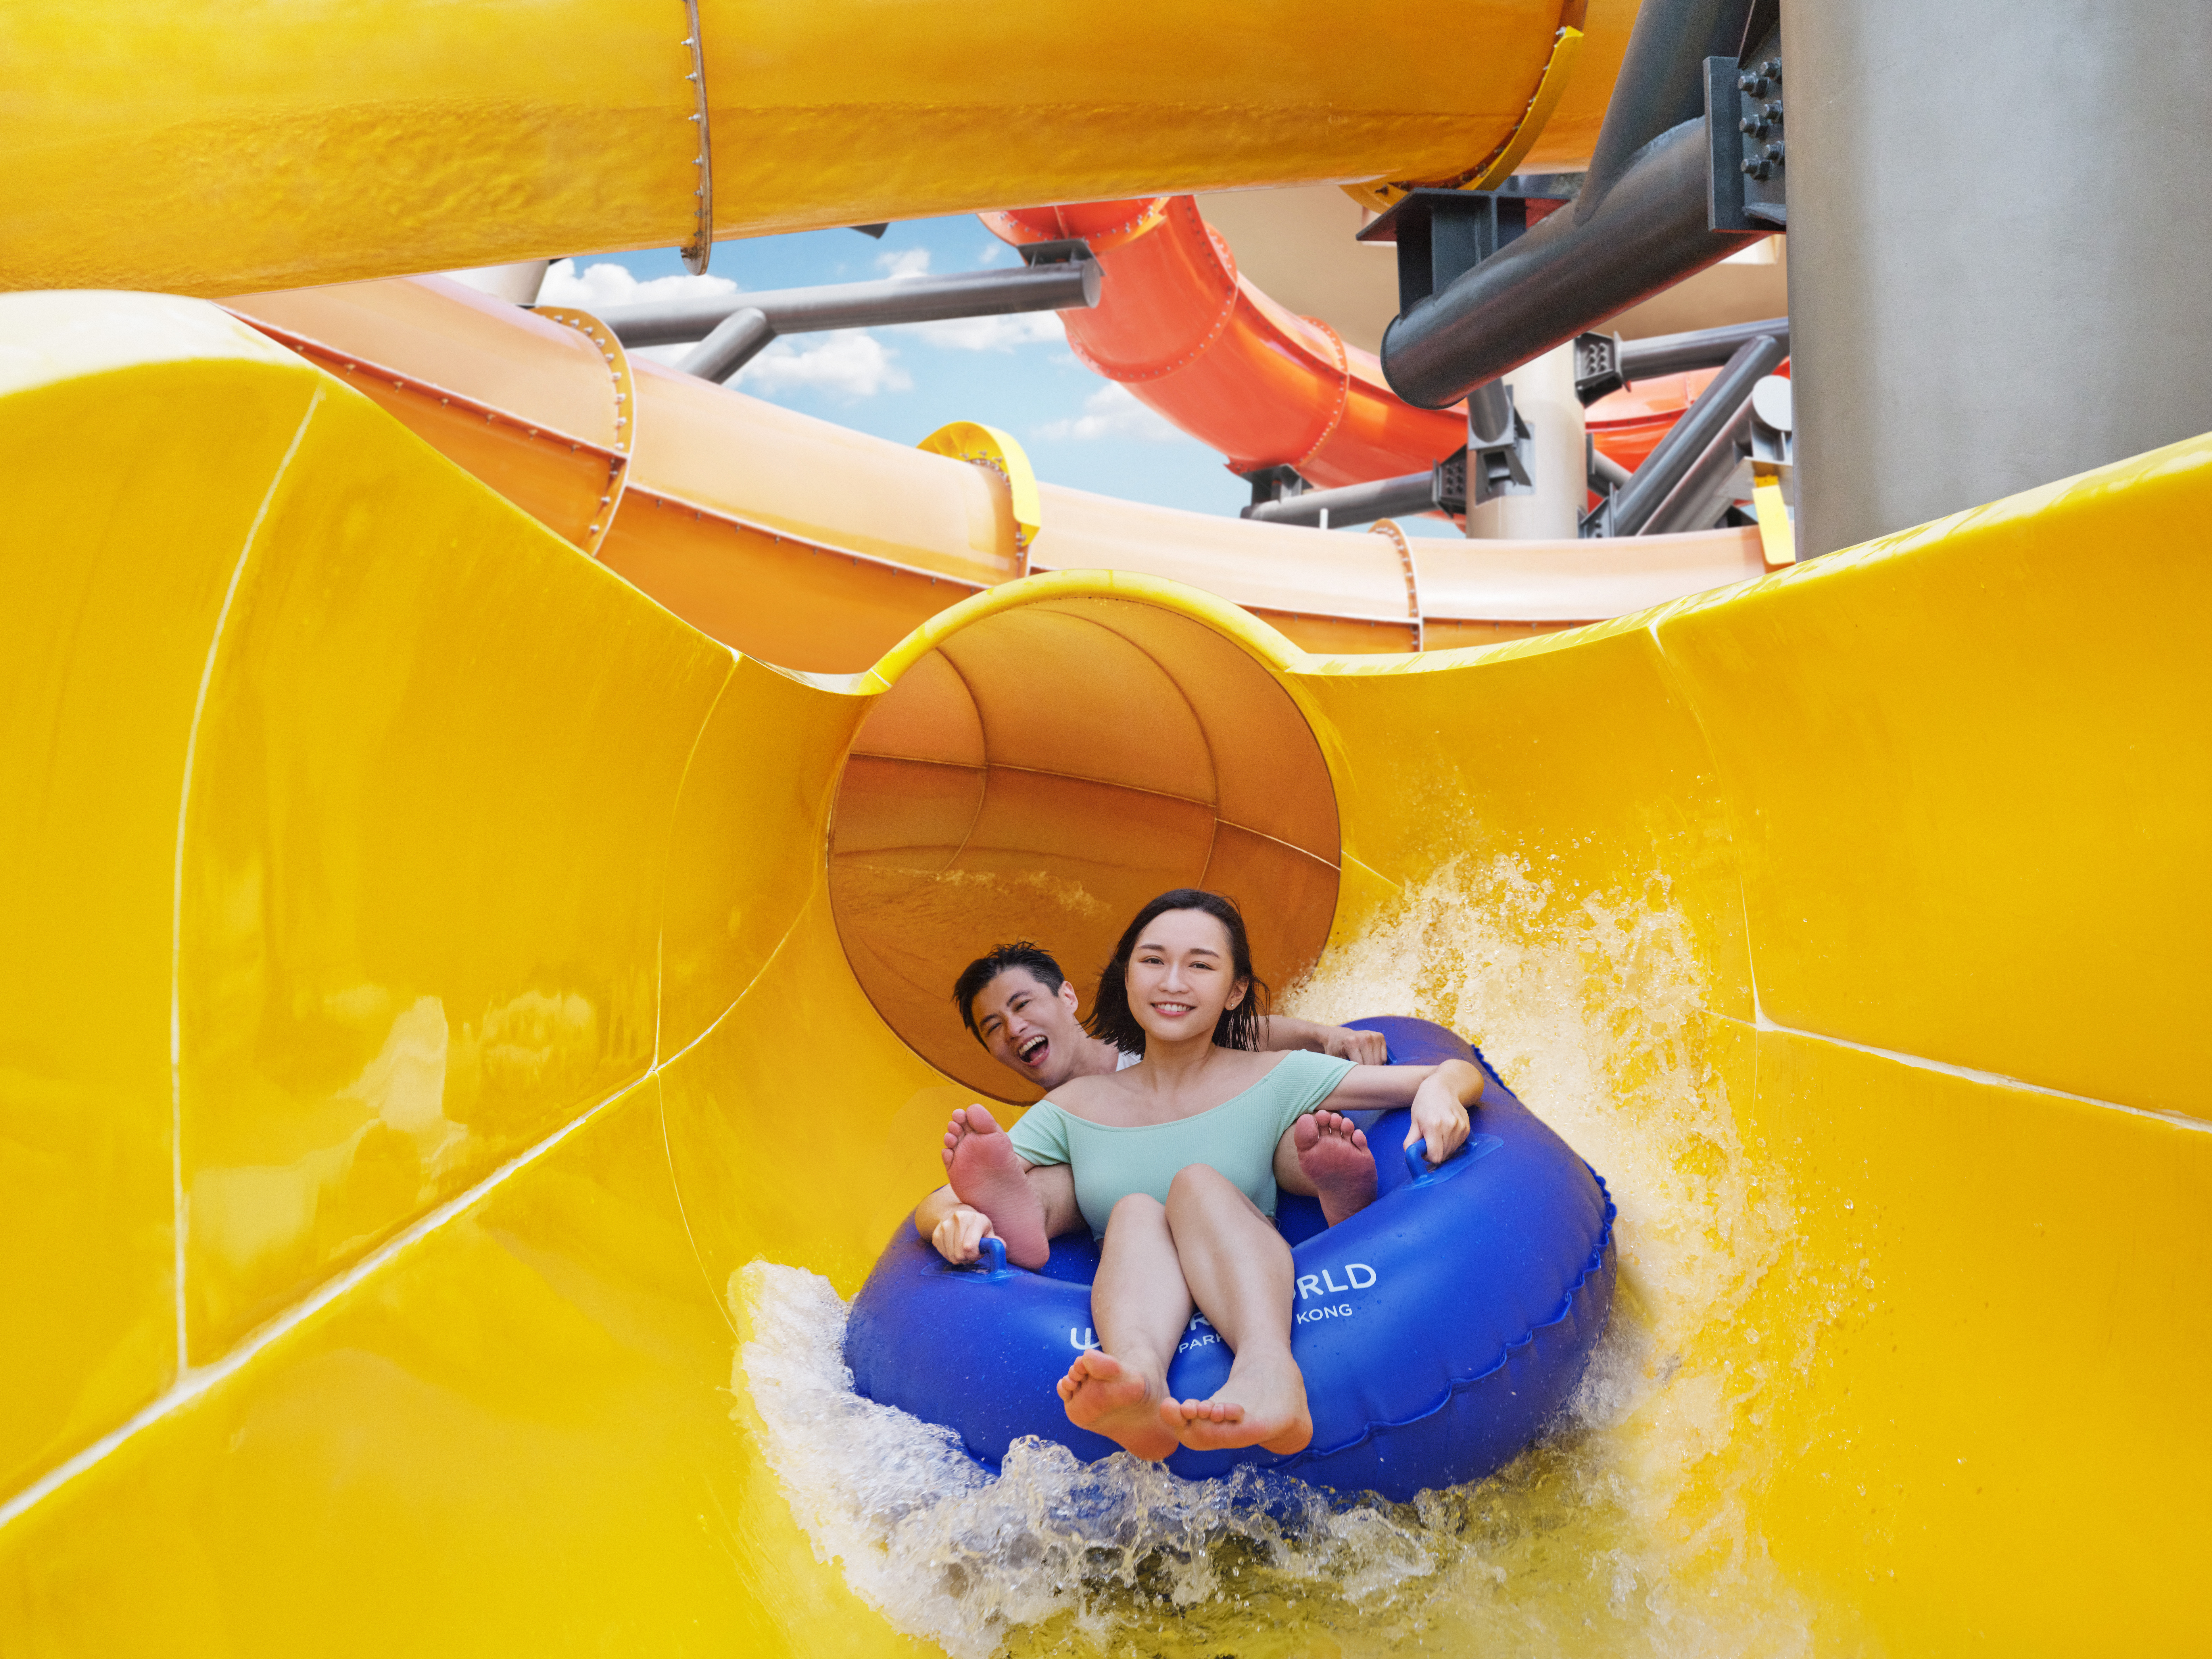 Man and woman on blue inner tube going down giant yellow water slide flume